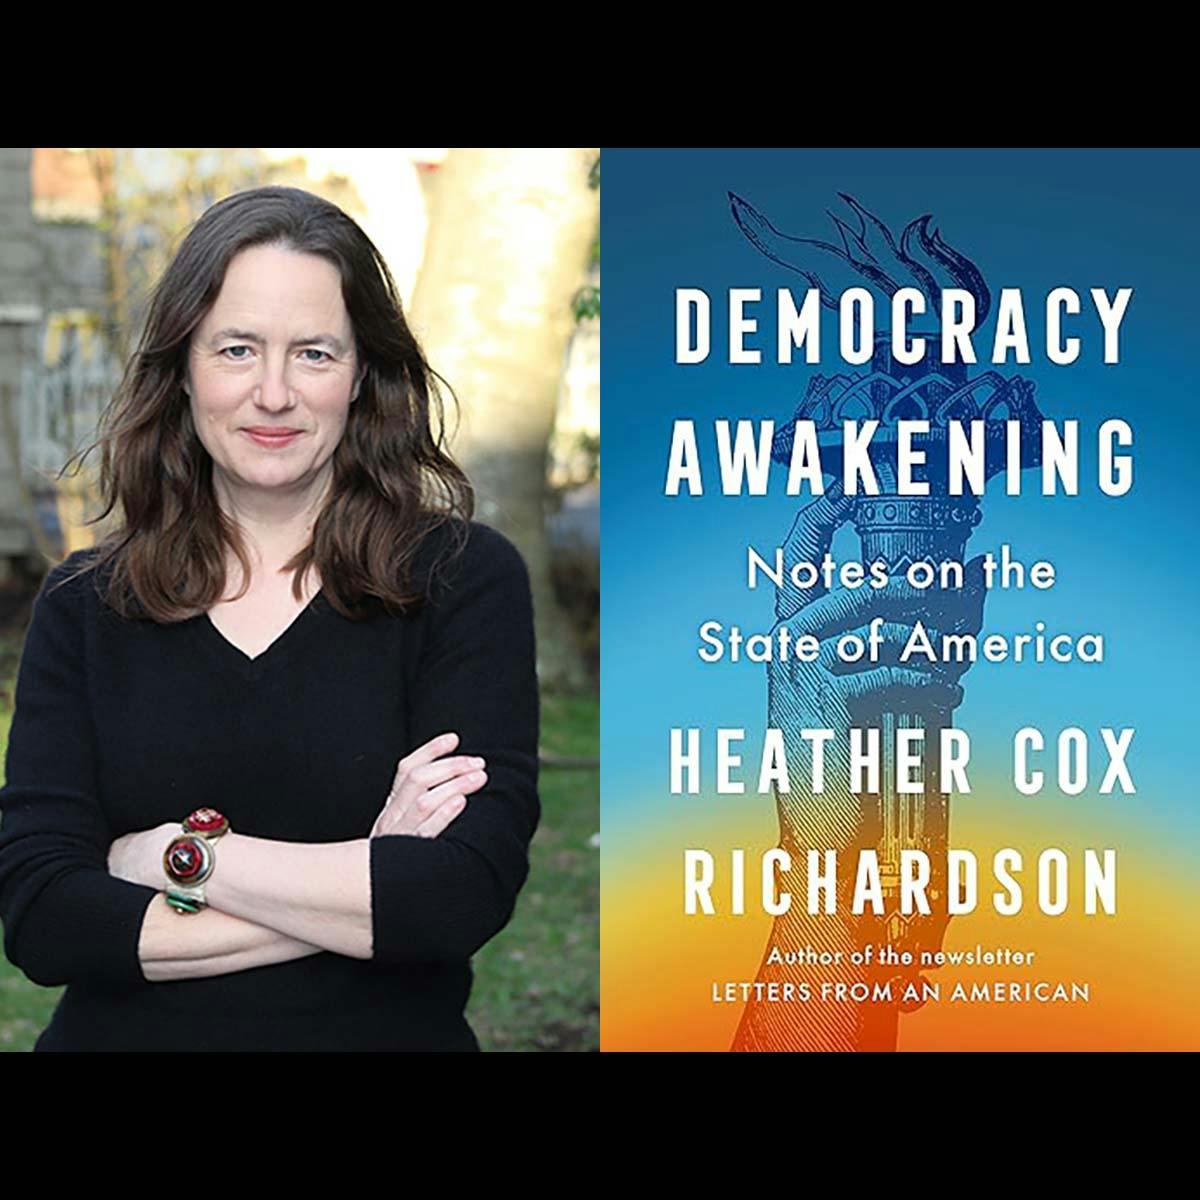 Heather Cox Richardson on the State of American Democracy